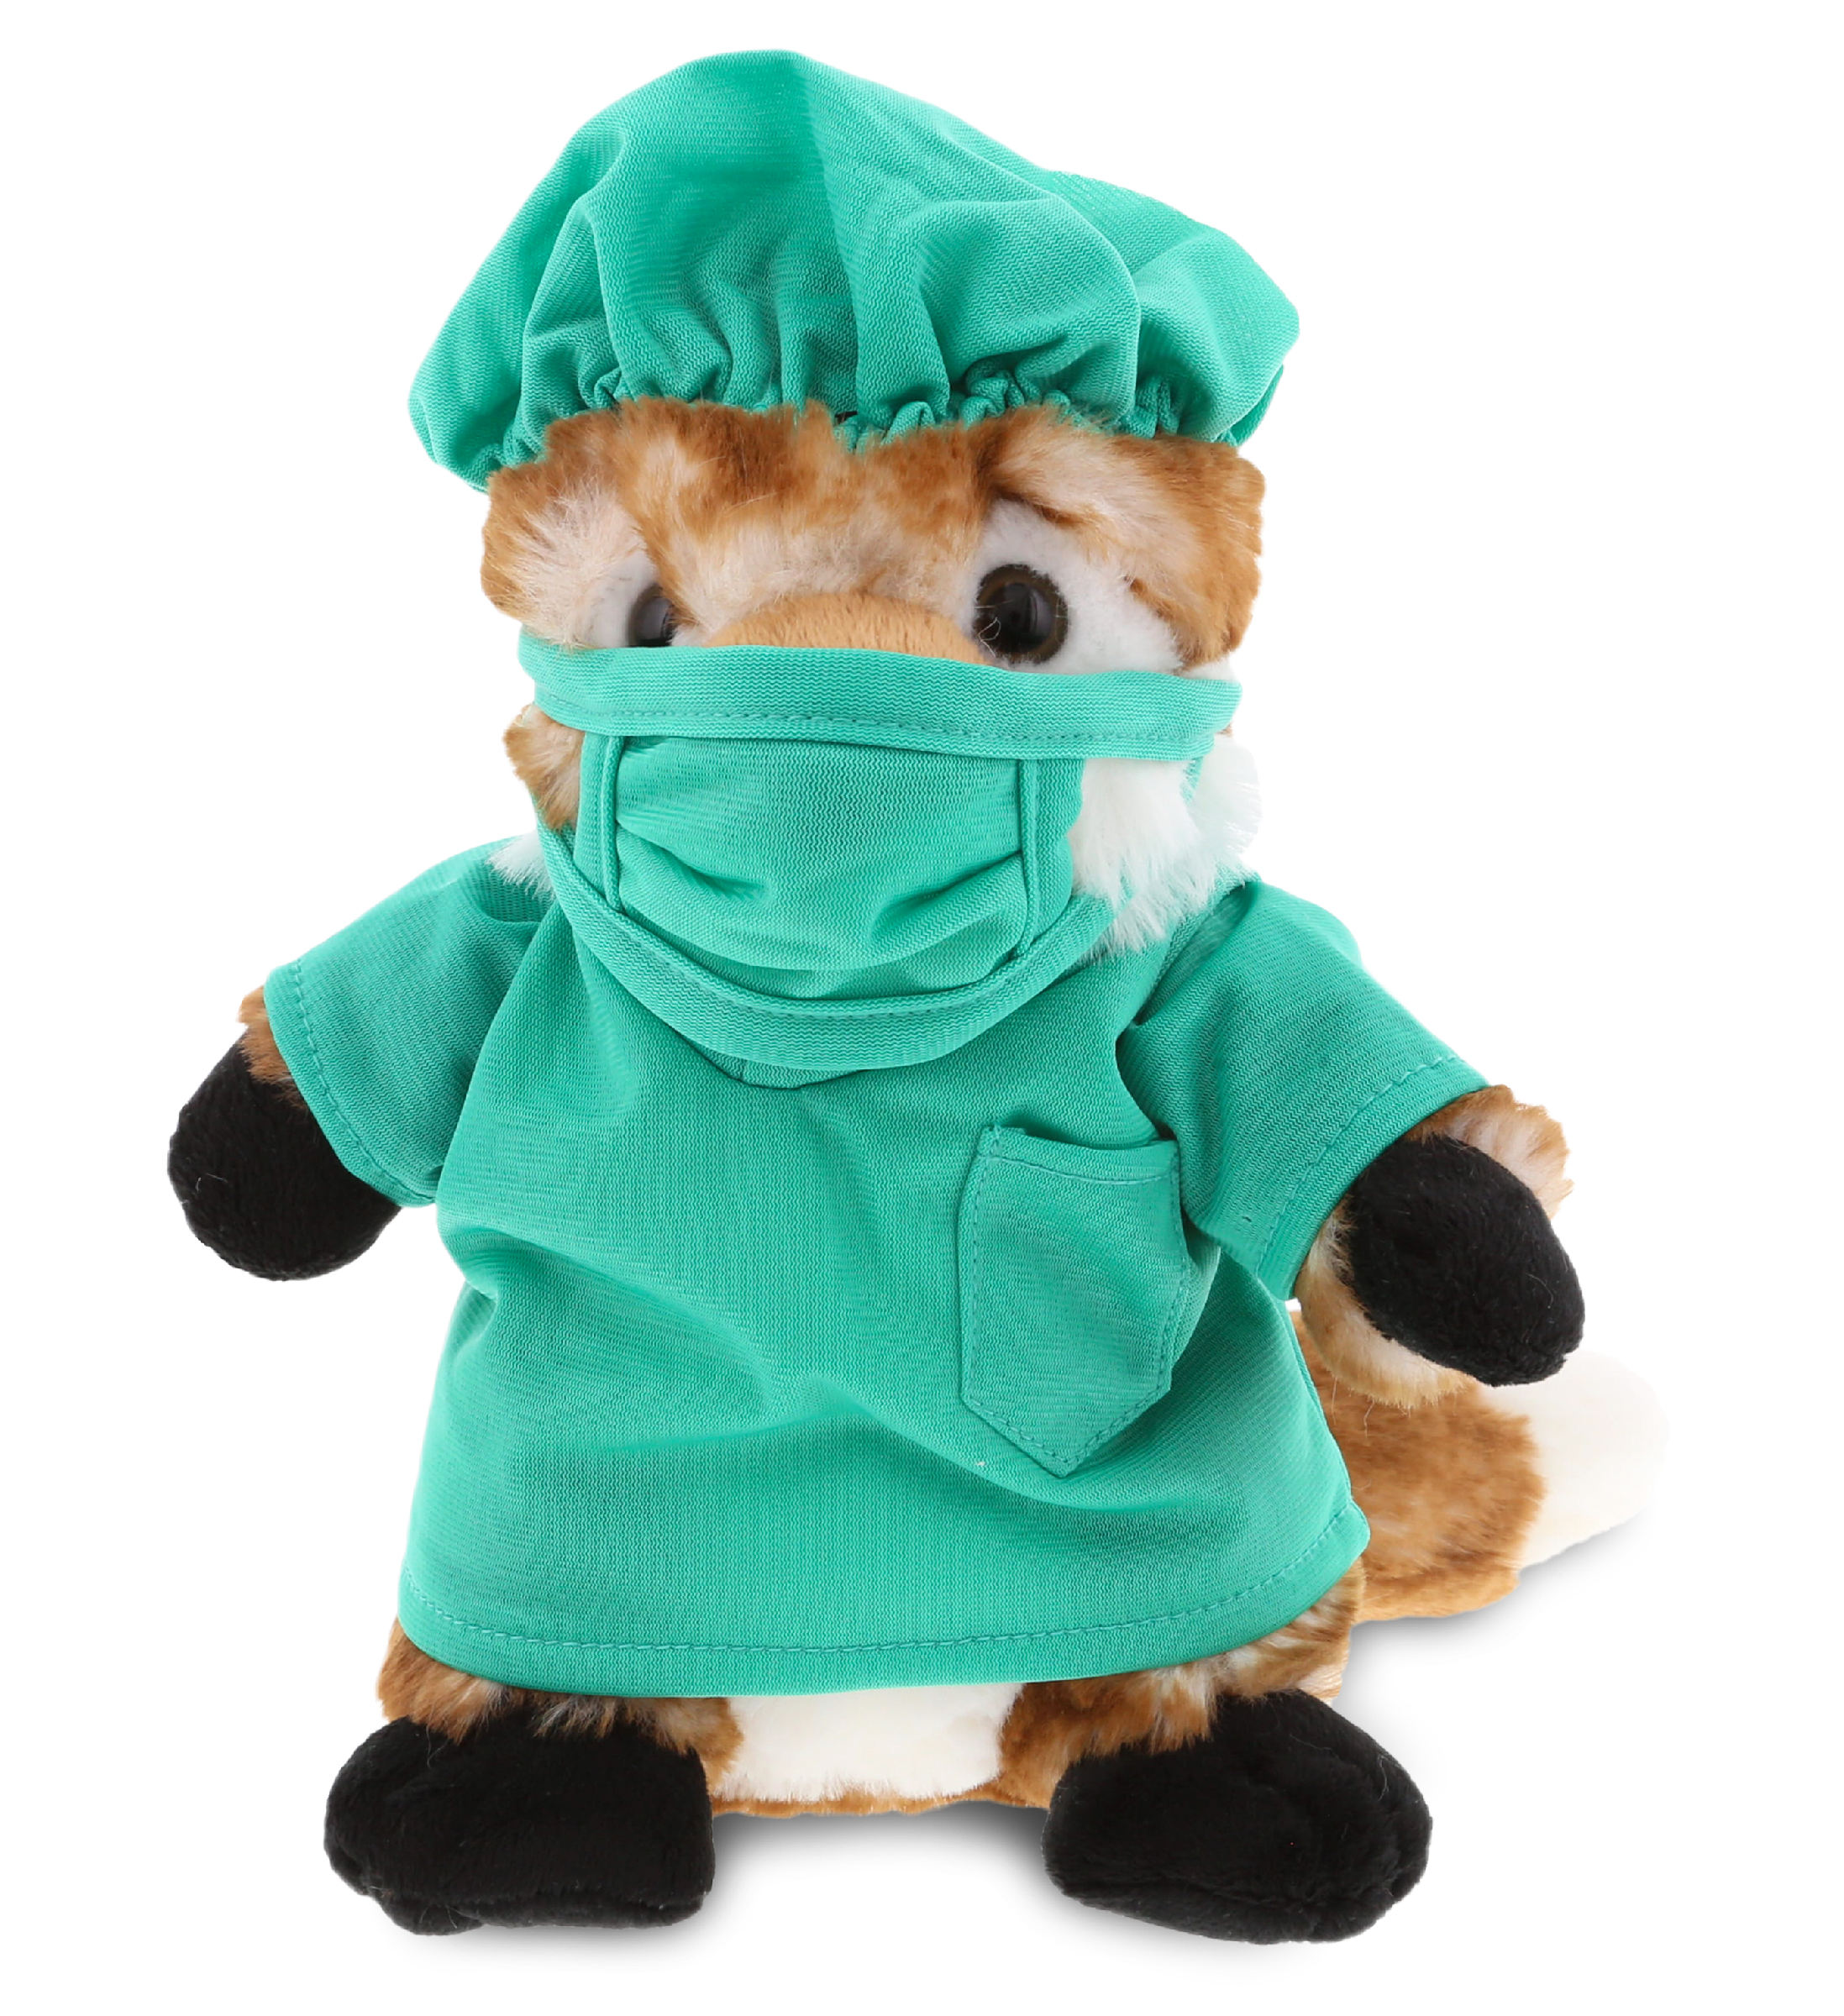 DolliBu Fox Doctor Plush Toy – Super Soft Red Fox Doctor Stuffed Animal  Dress Up with Cute Scrub Uniform & Cap Outfit – Fluffy Doctor Toy Plush  Gift – 9.5″ Inches - DolliBu